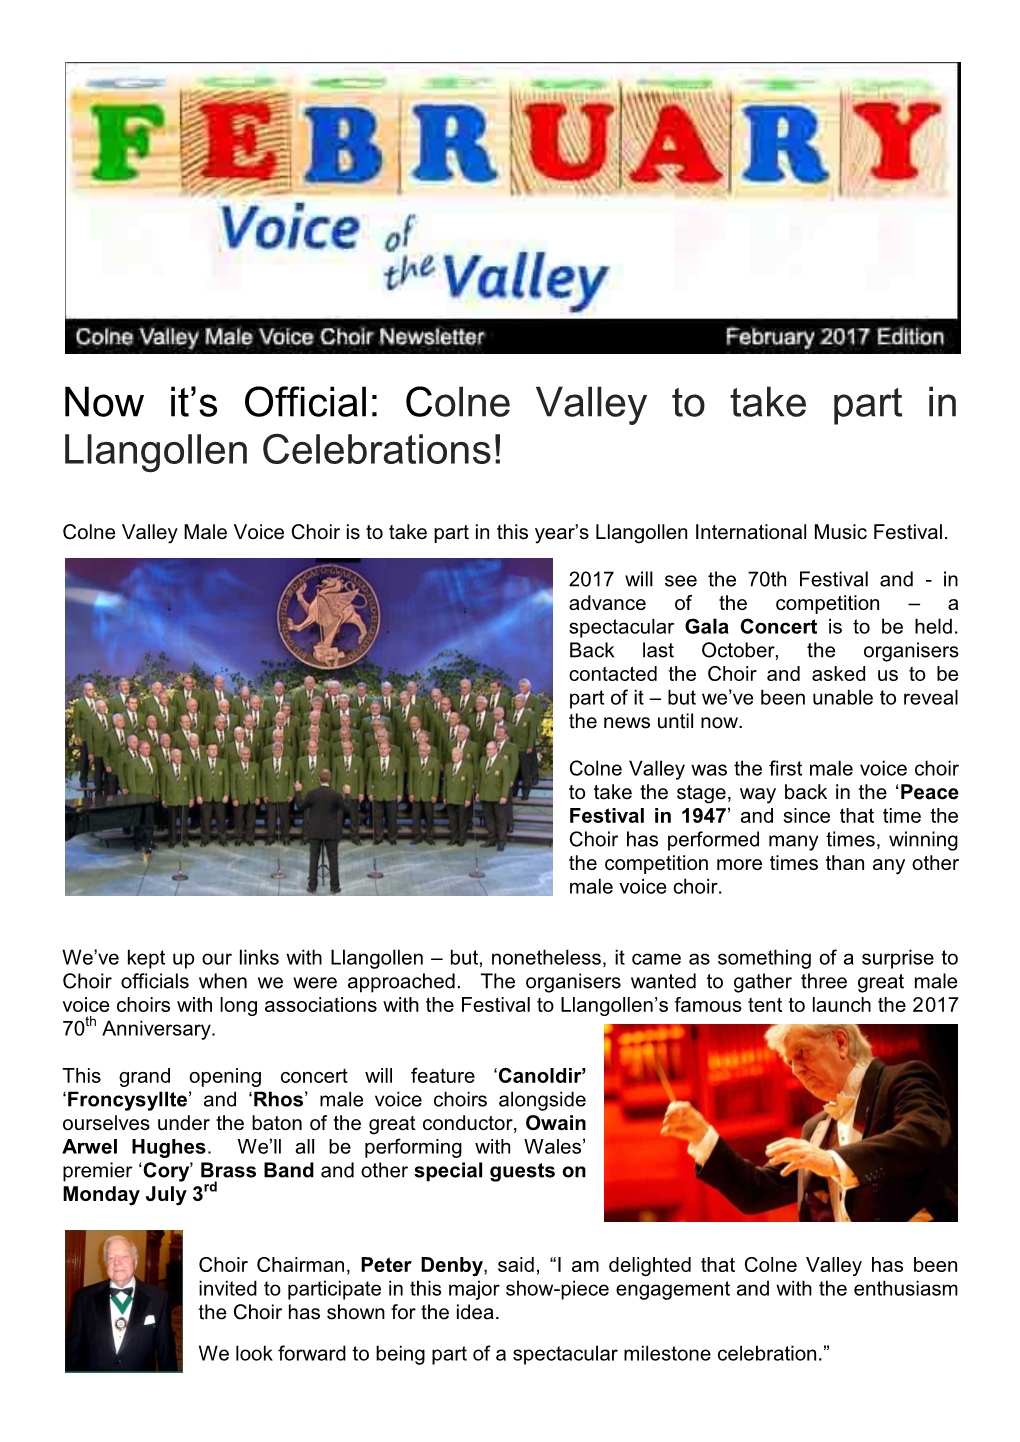 Now It's Official: C Olne Valley to Take Part in Llangollen Celebrations!